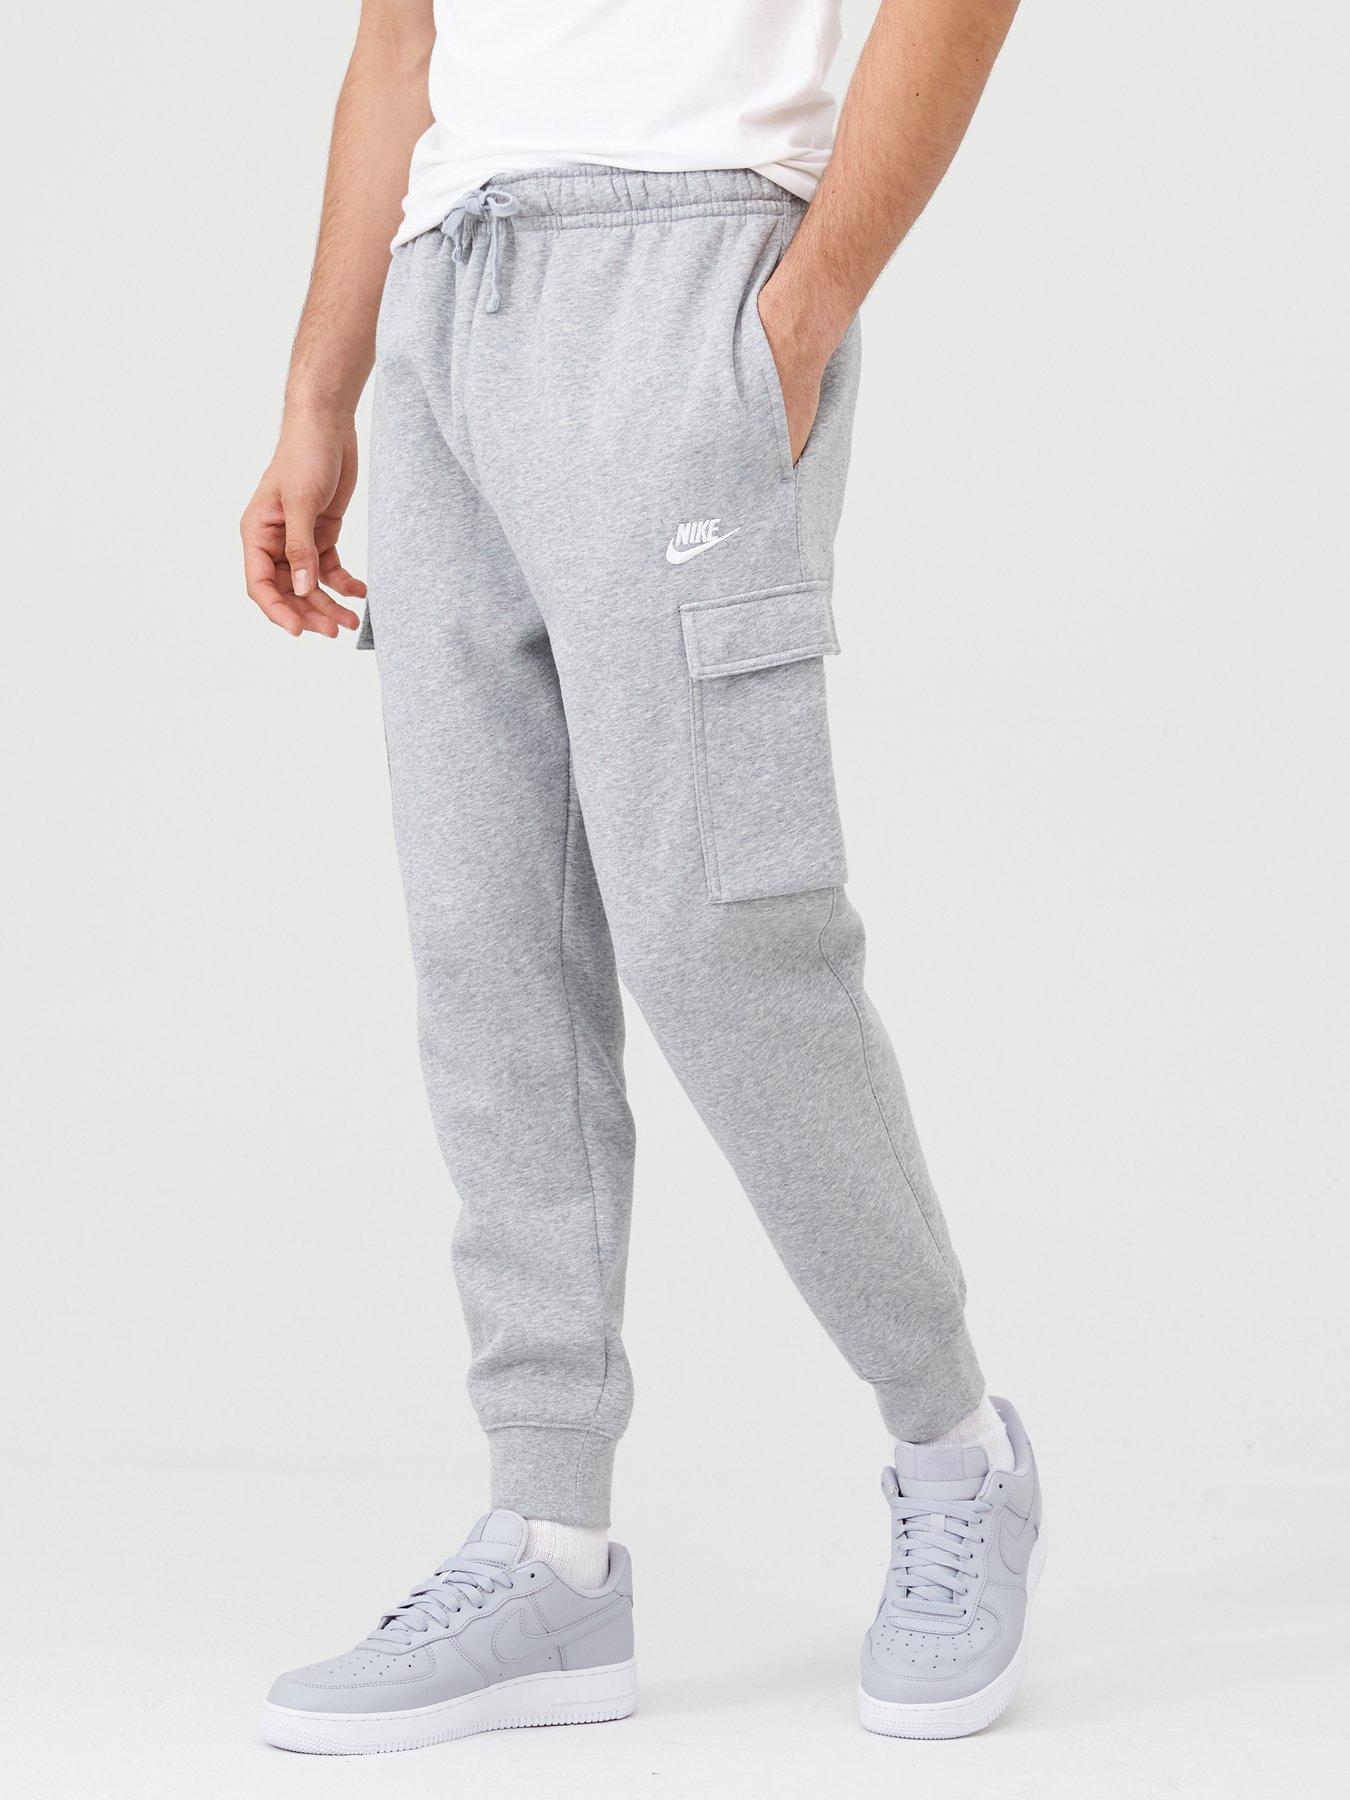 joggers littlewoods